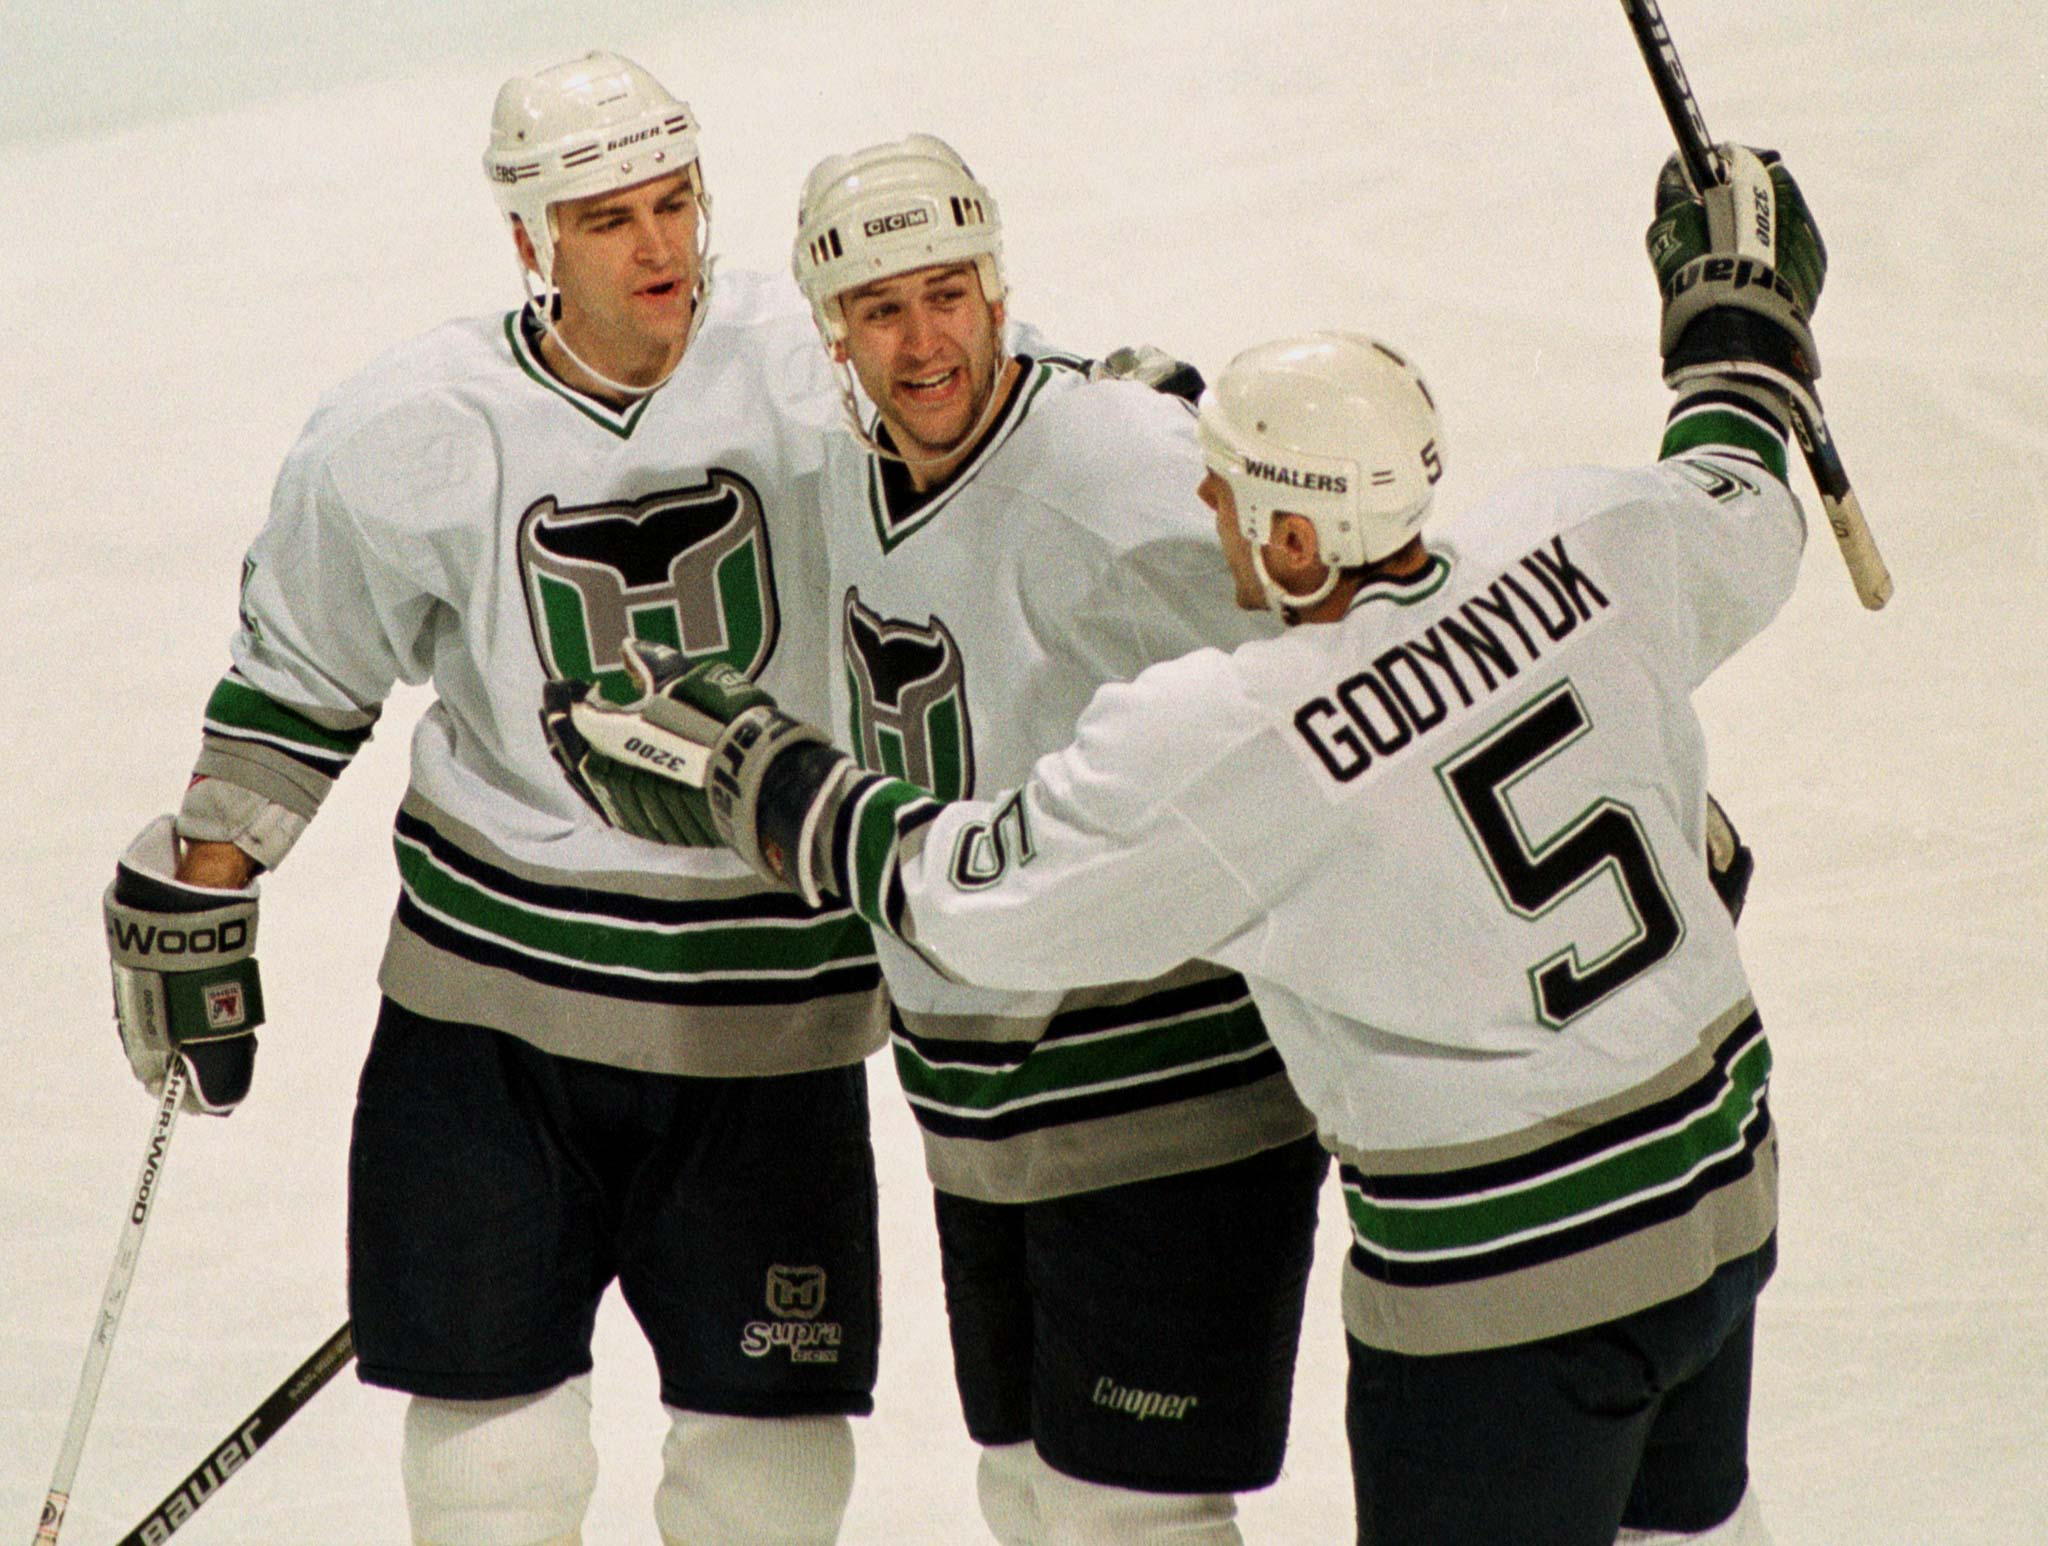 Connecticut Today With Paul Pacelli: The Continuing Mystique of the Hartford Whalers